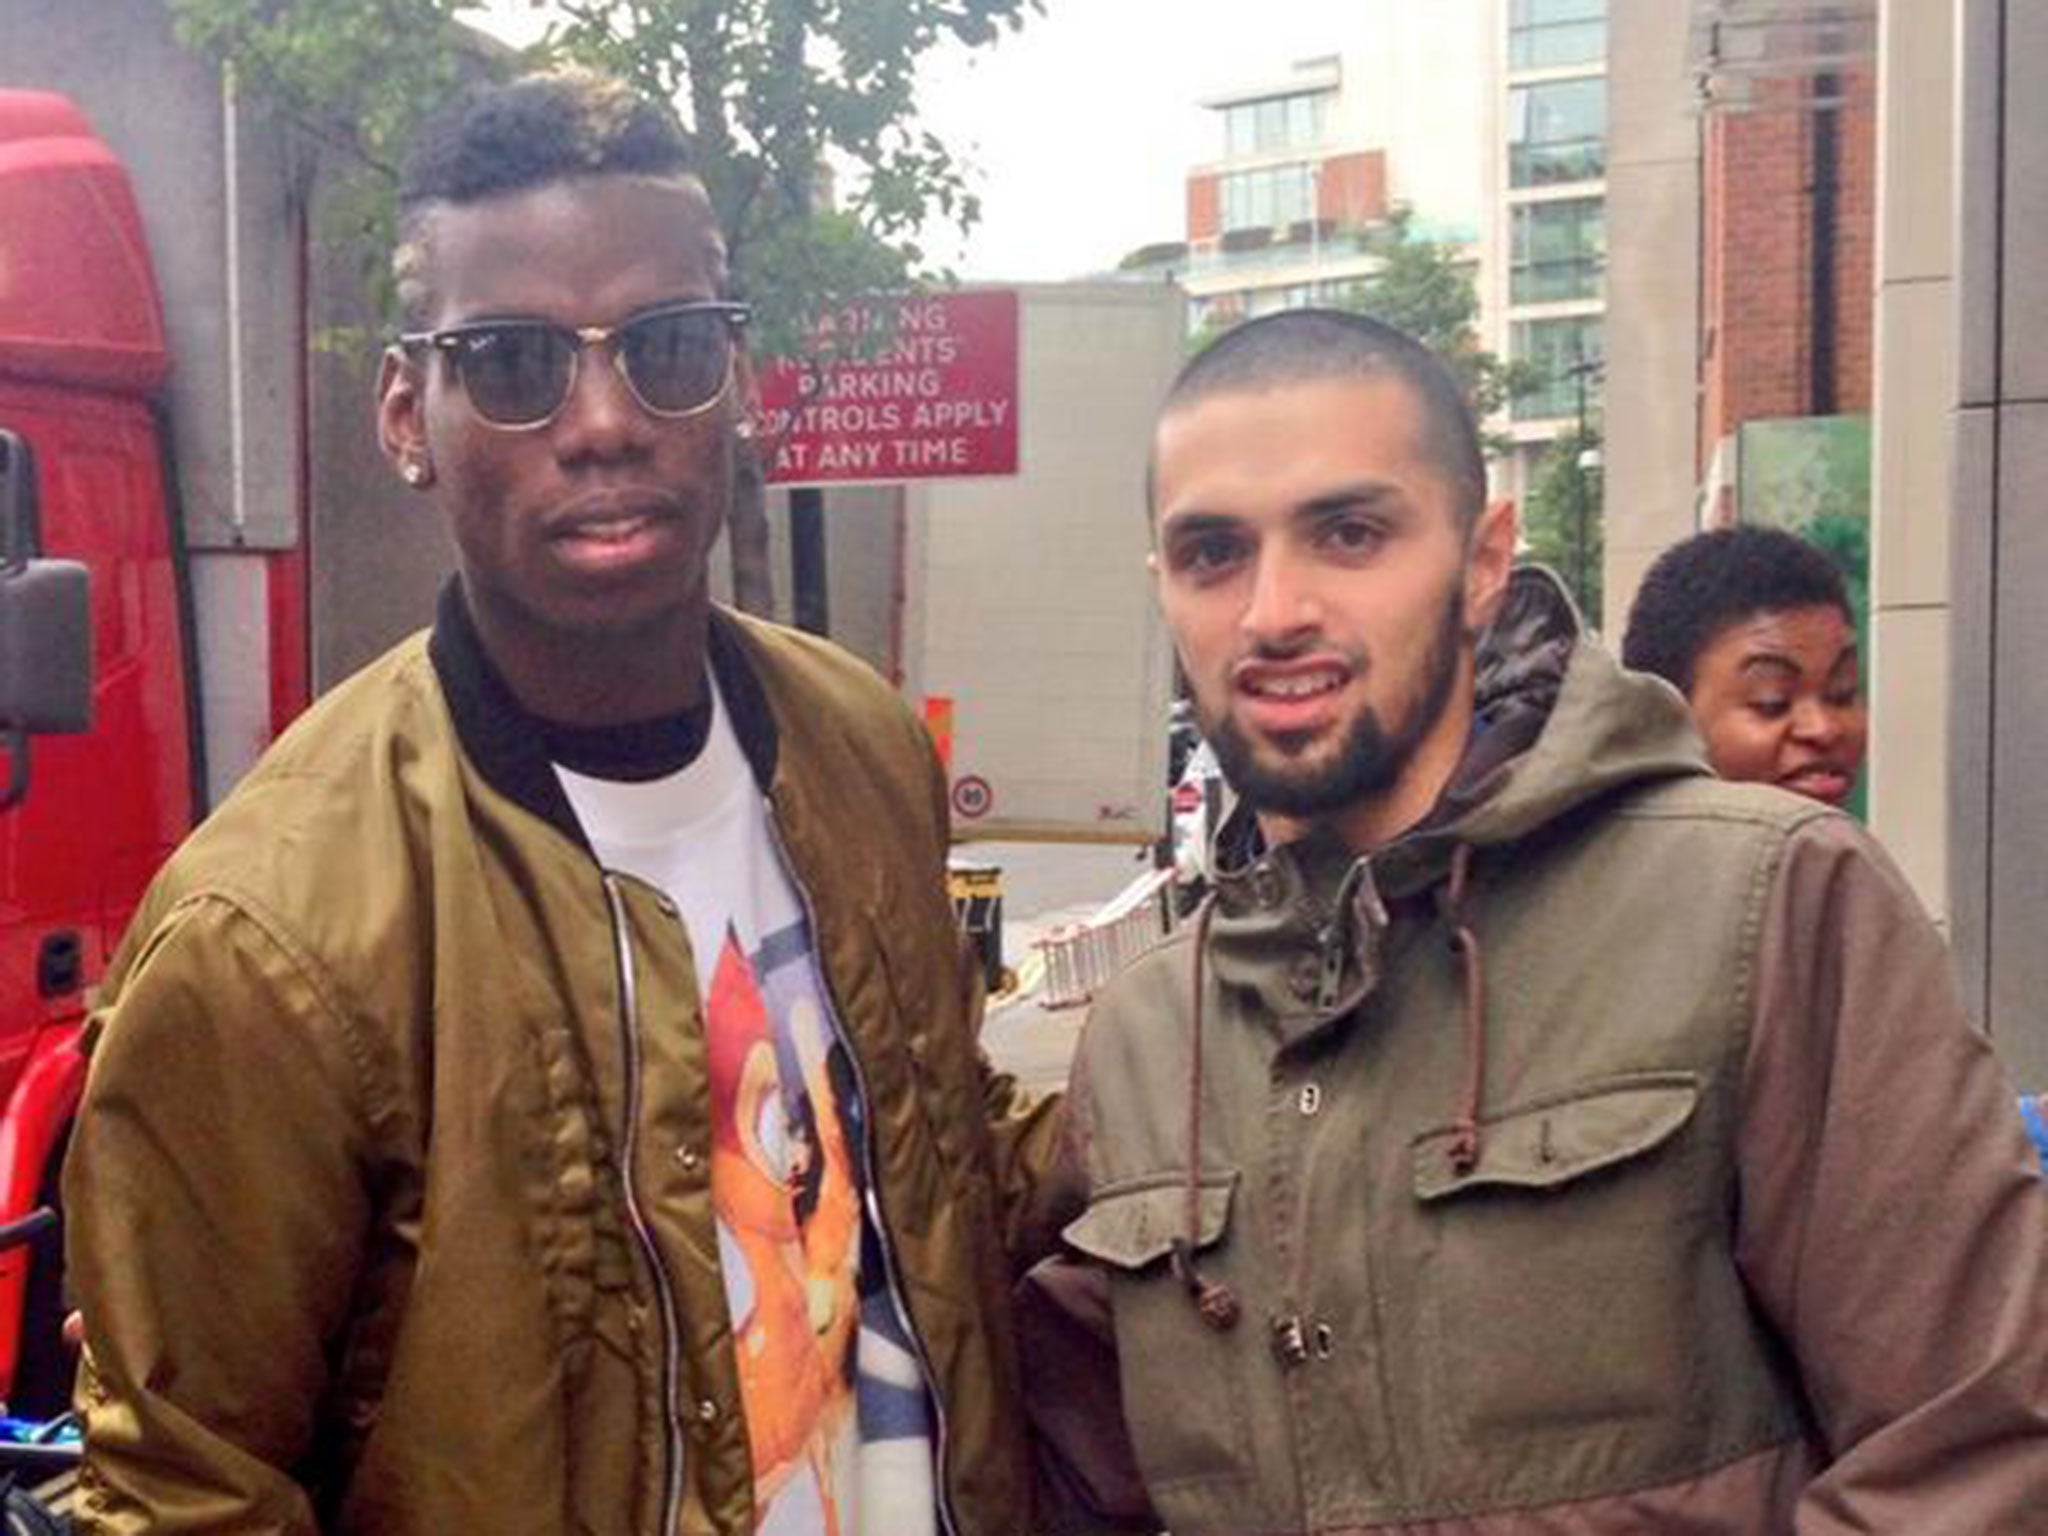 Paul Pogba pictured with a fan in London on Thursday